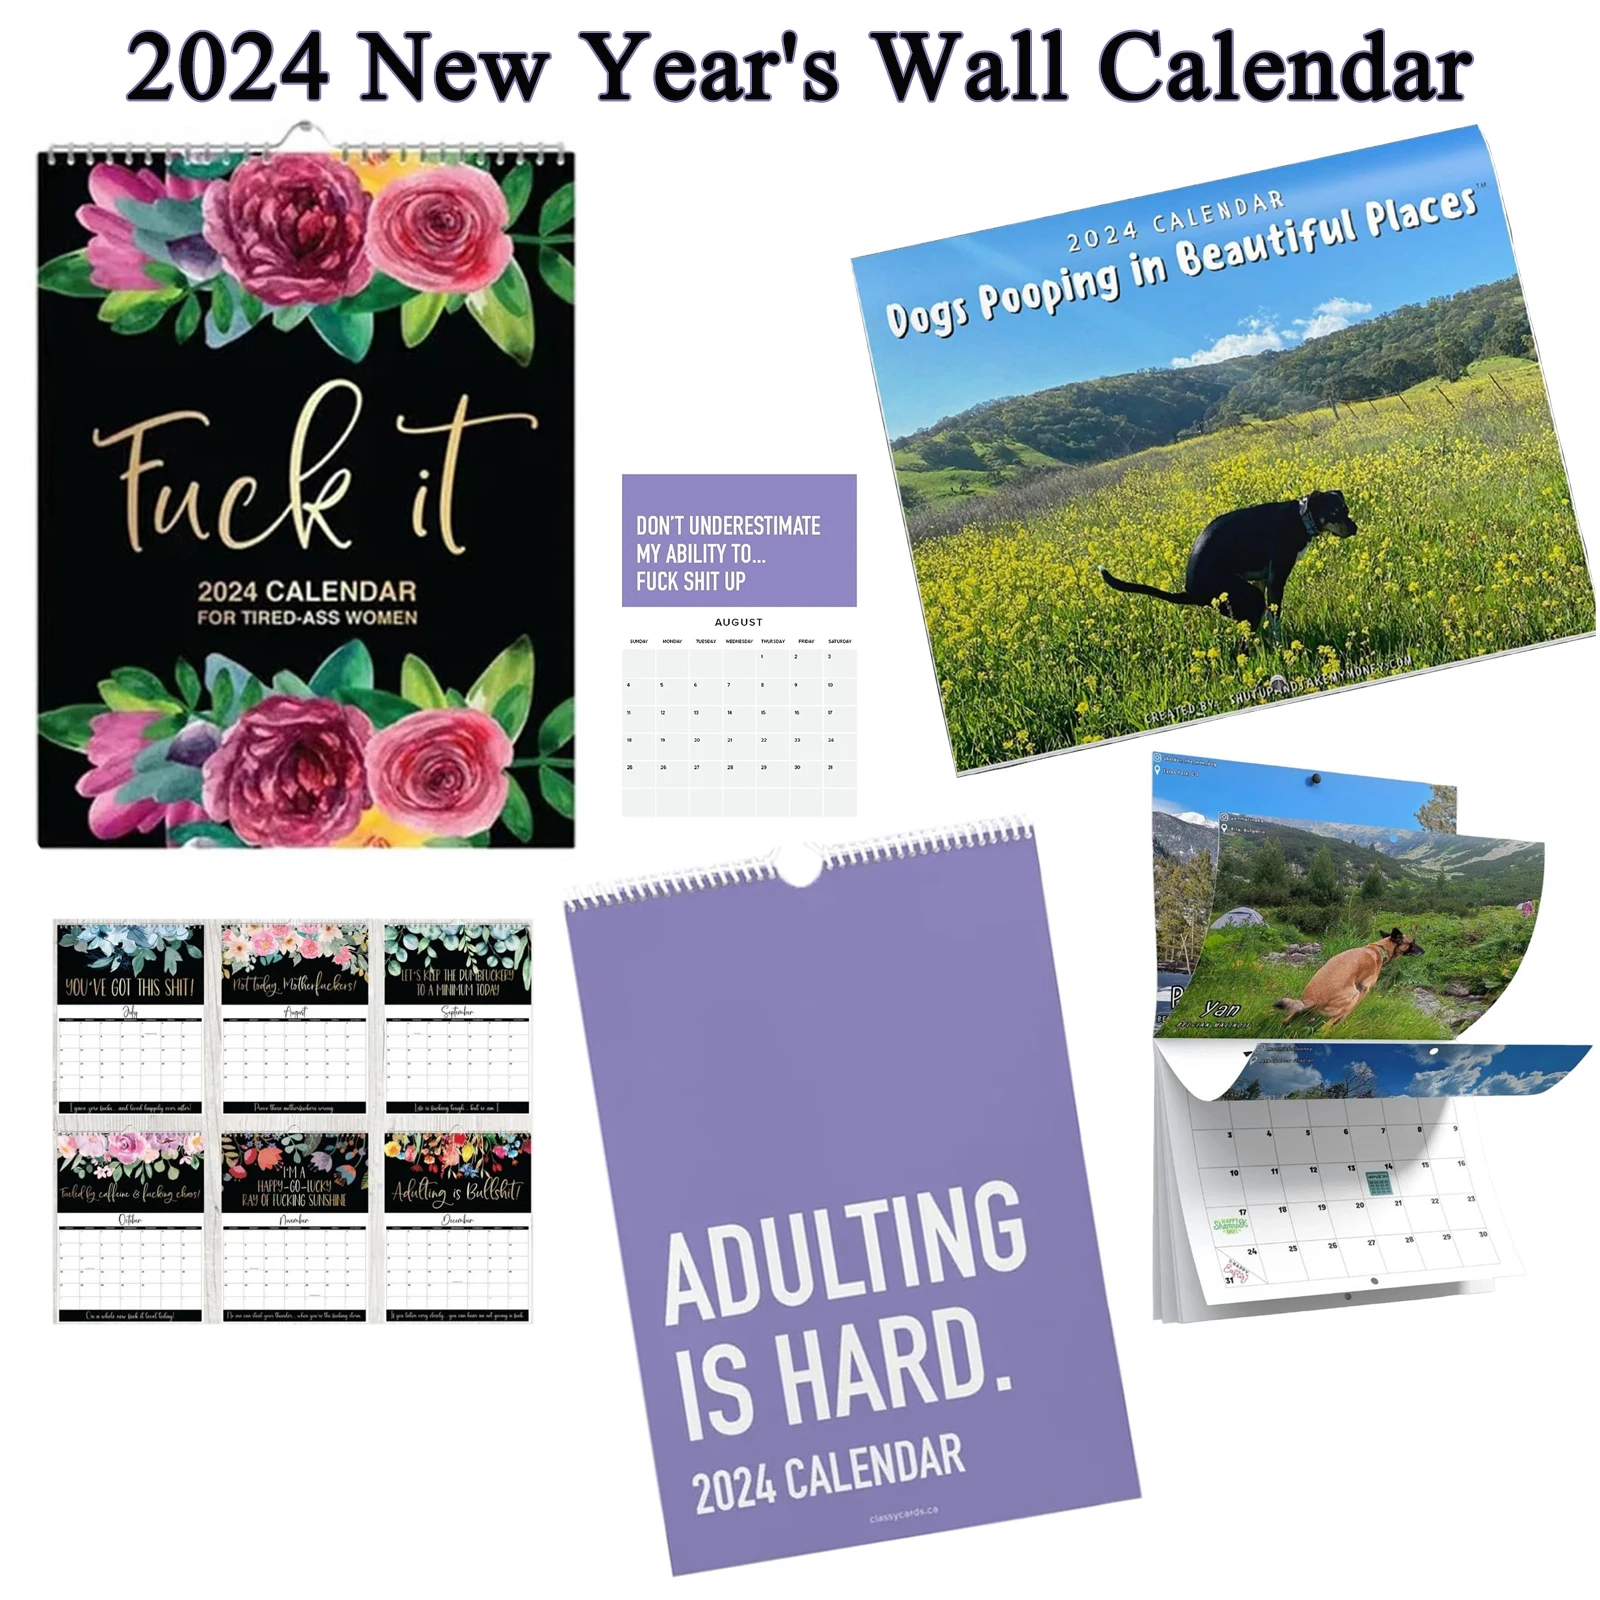 Monthly Wall Calendar 2024 Funny Dog Pooping Calendar Gift Flowers Hanging Calendar Time Planning New Year Home Indoor Decor